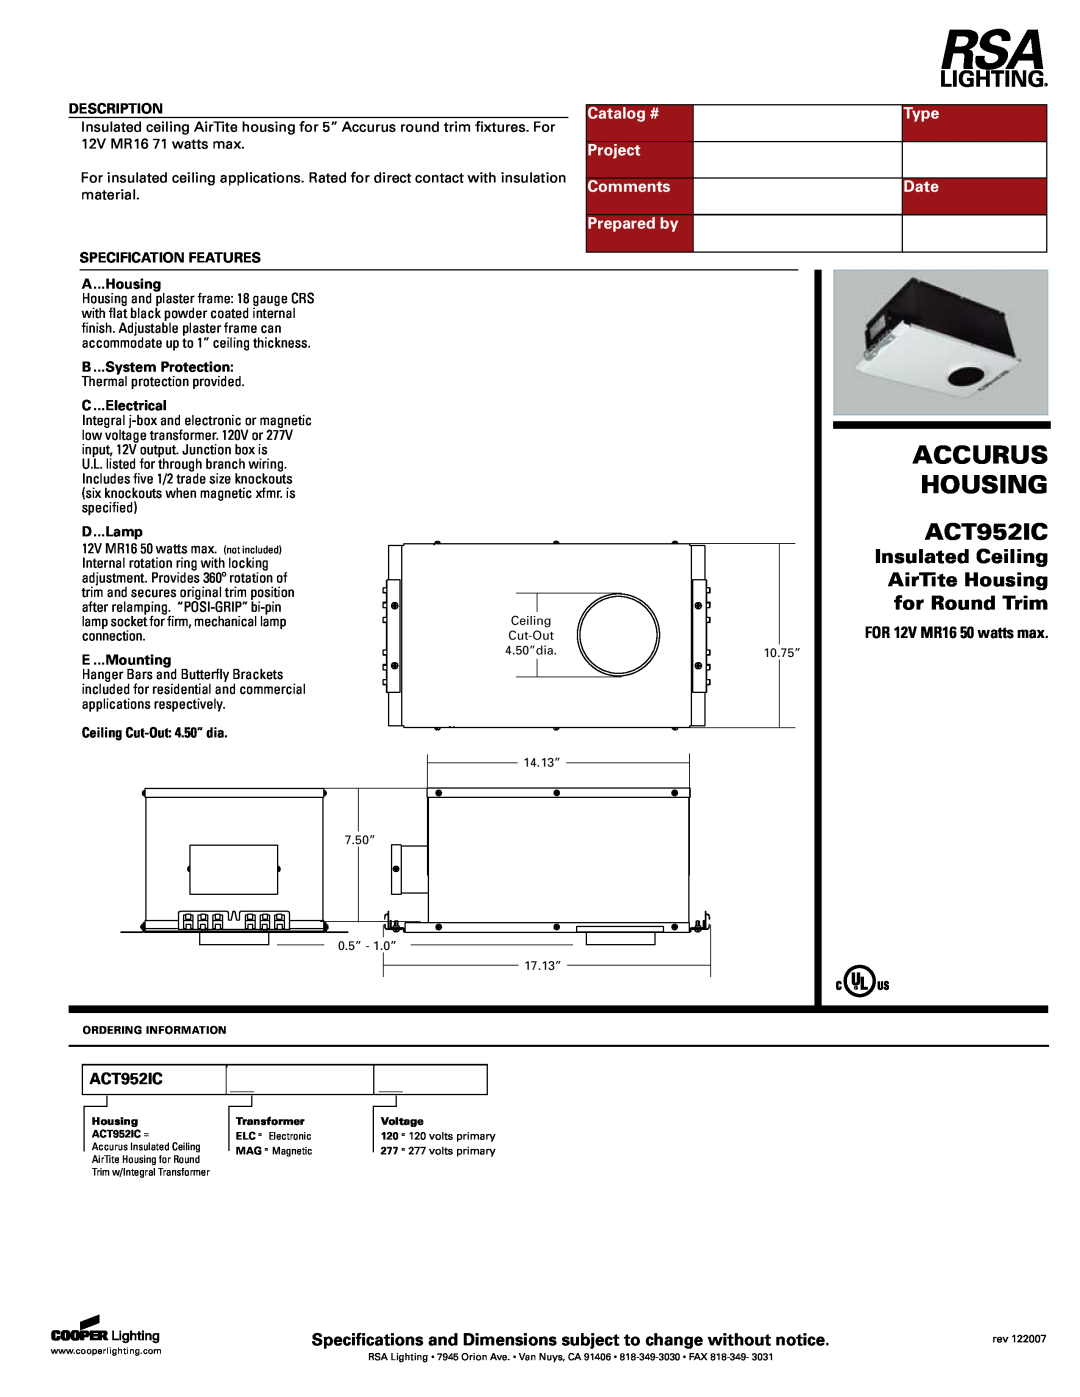 Cooper Lighting ACT952IC specifications Accurus, Insulated Ceiling, AirTite Housing, for Round Trim, Catalog #, Type 